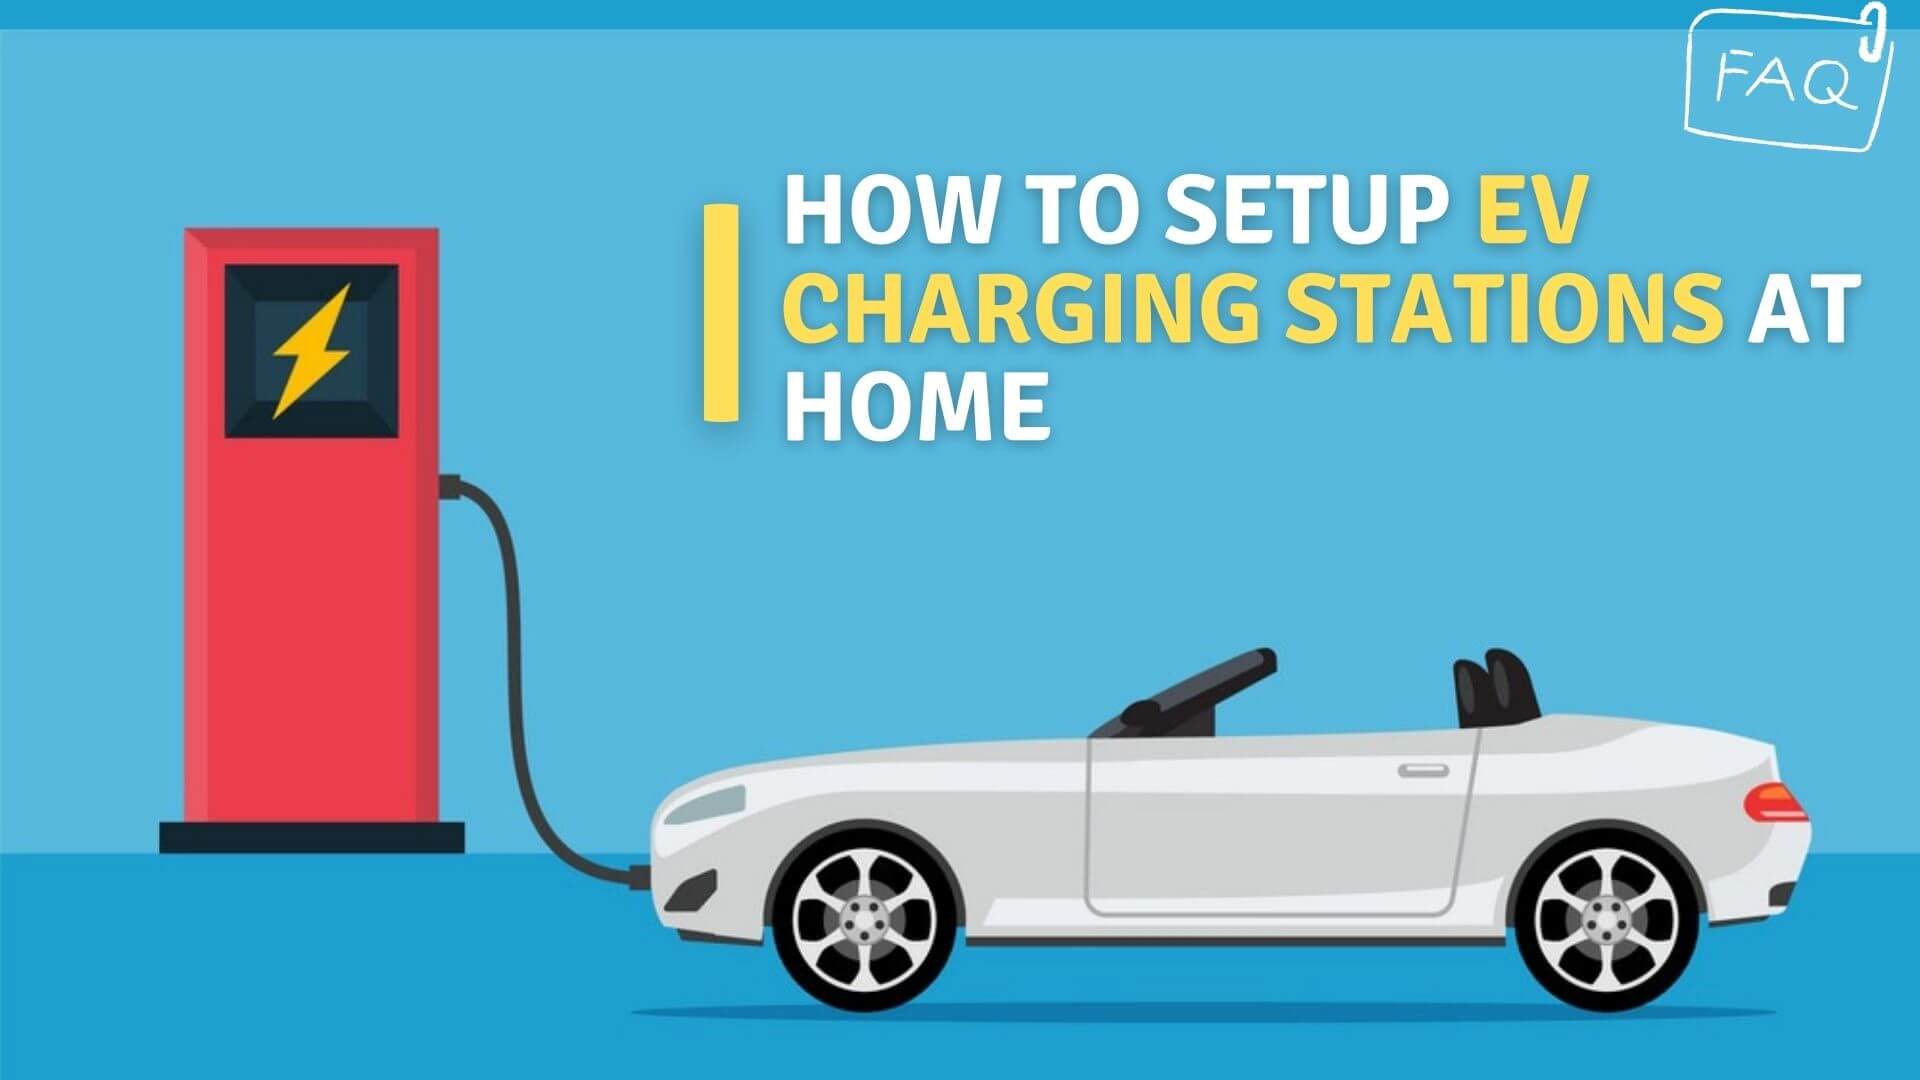 https://e-vehicleinfo.com/setup-electric-charging-stations-at-home/